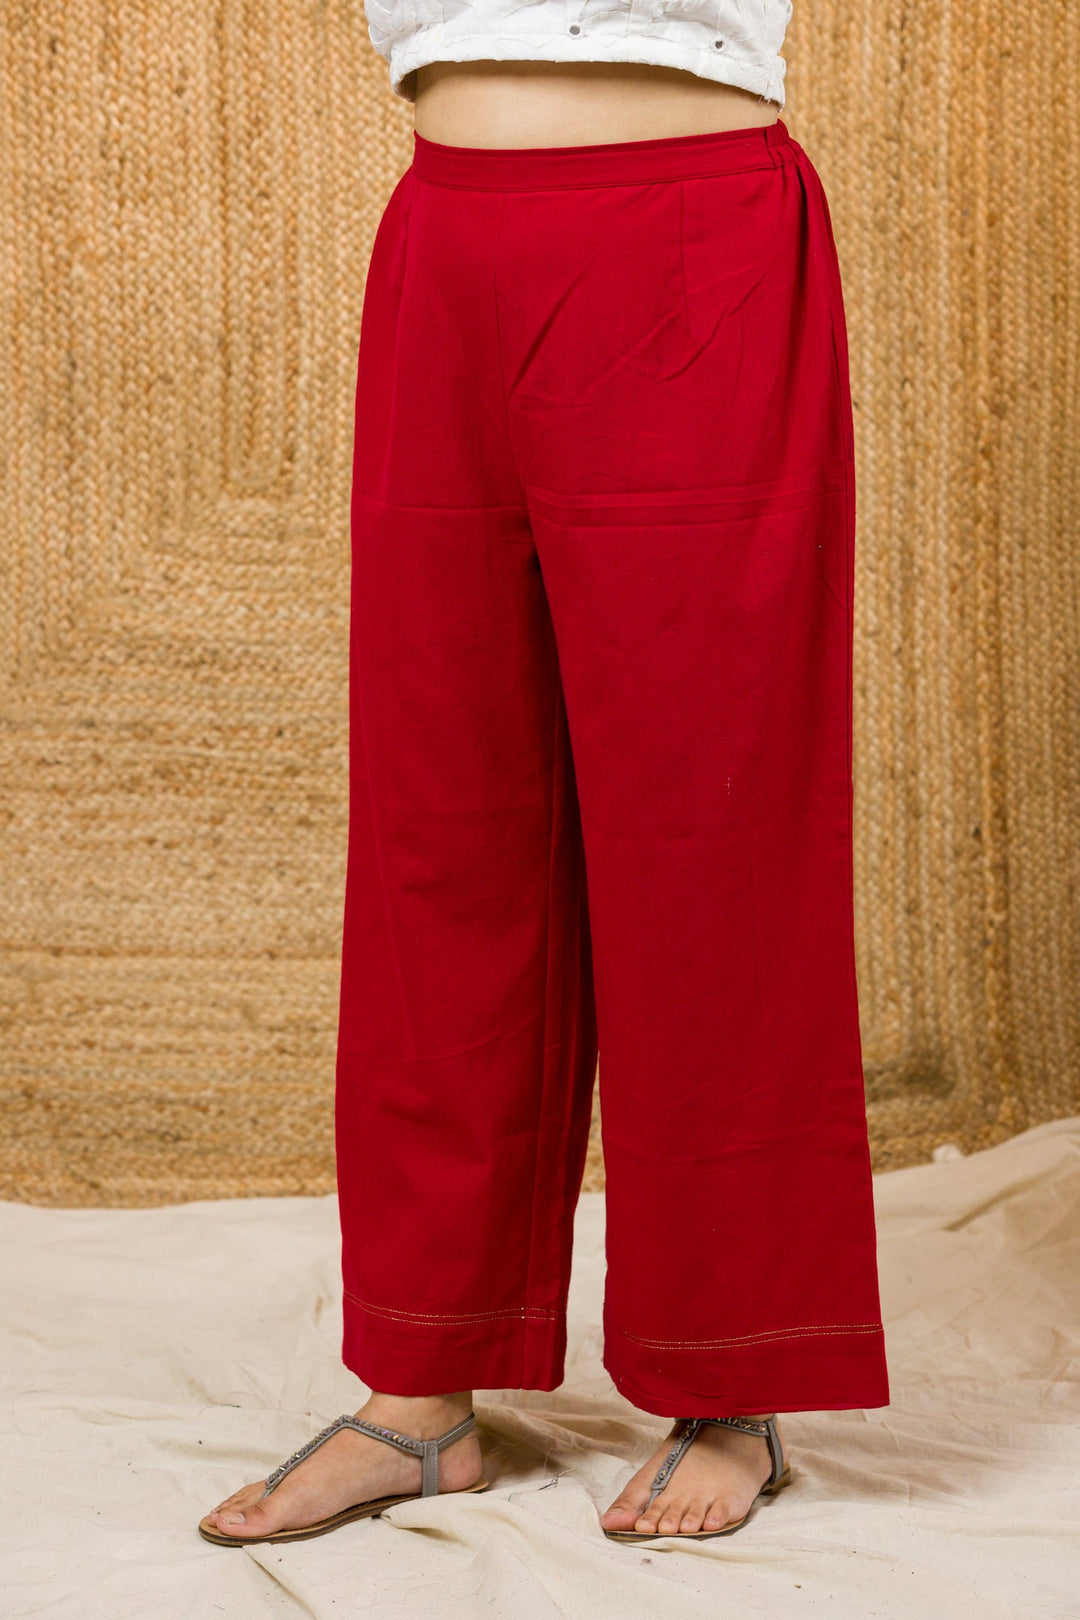 Handloom Pant With Golden Detailing - womenswear - 1088/W/P/R